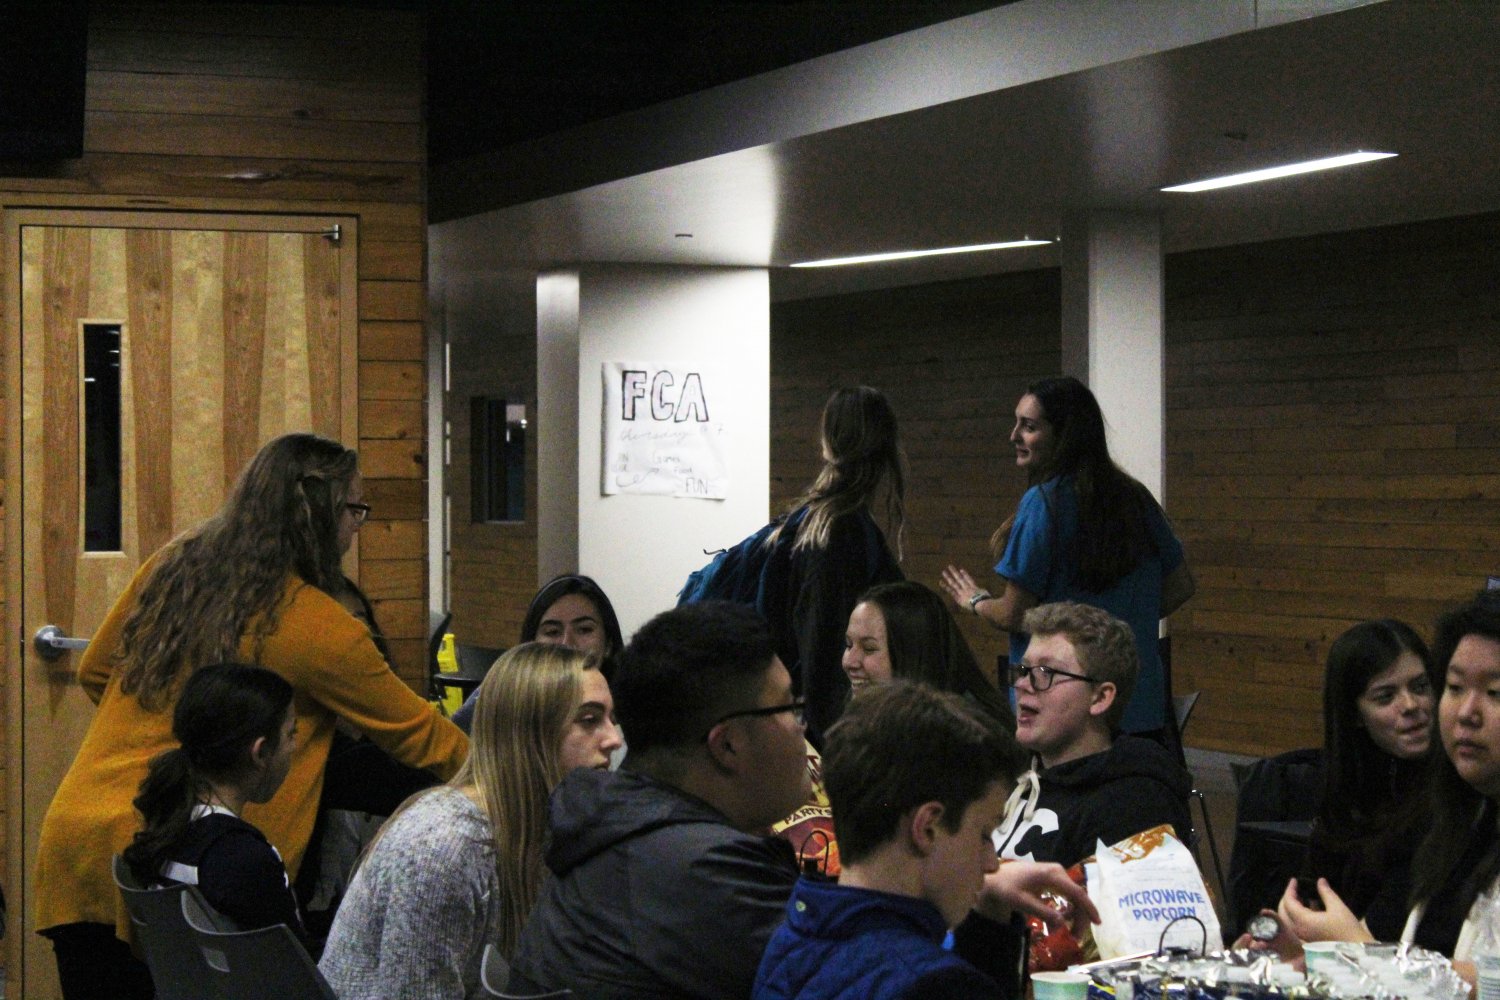 Students laugh together as they enjoy their food at the StuCo club feast. Senior Macy Hendricks reaches for more snacks as she talks to other club members.
Photo by Kyla Barnett